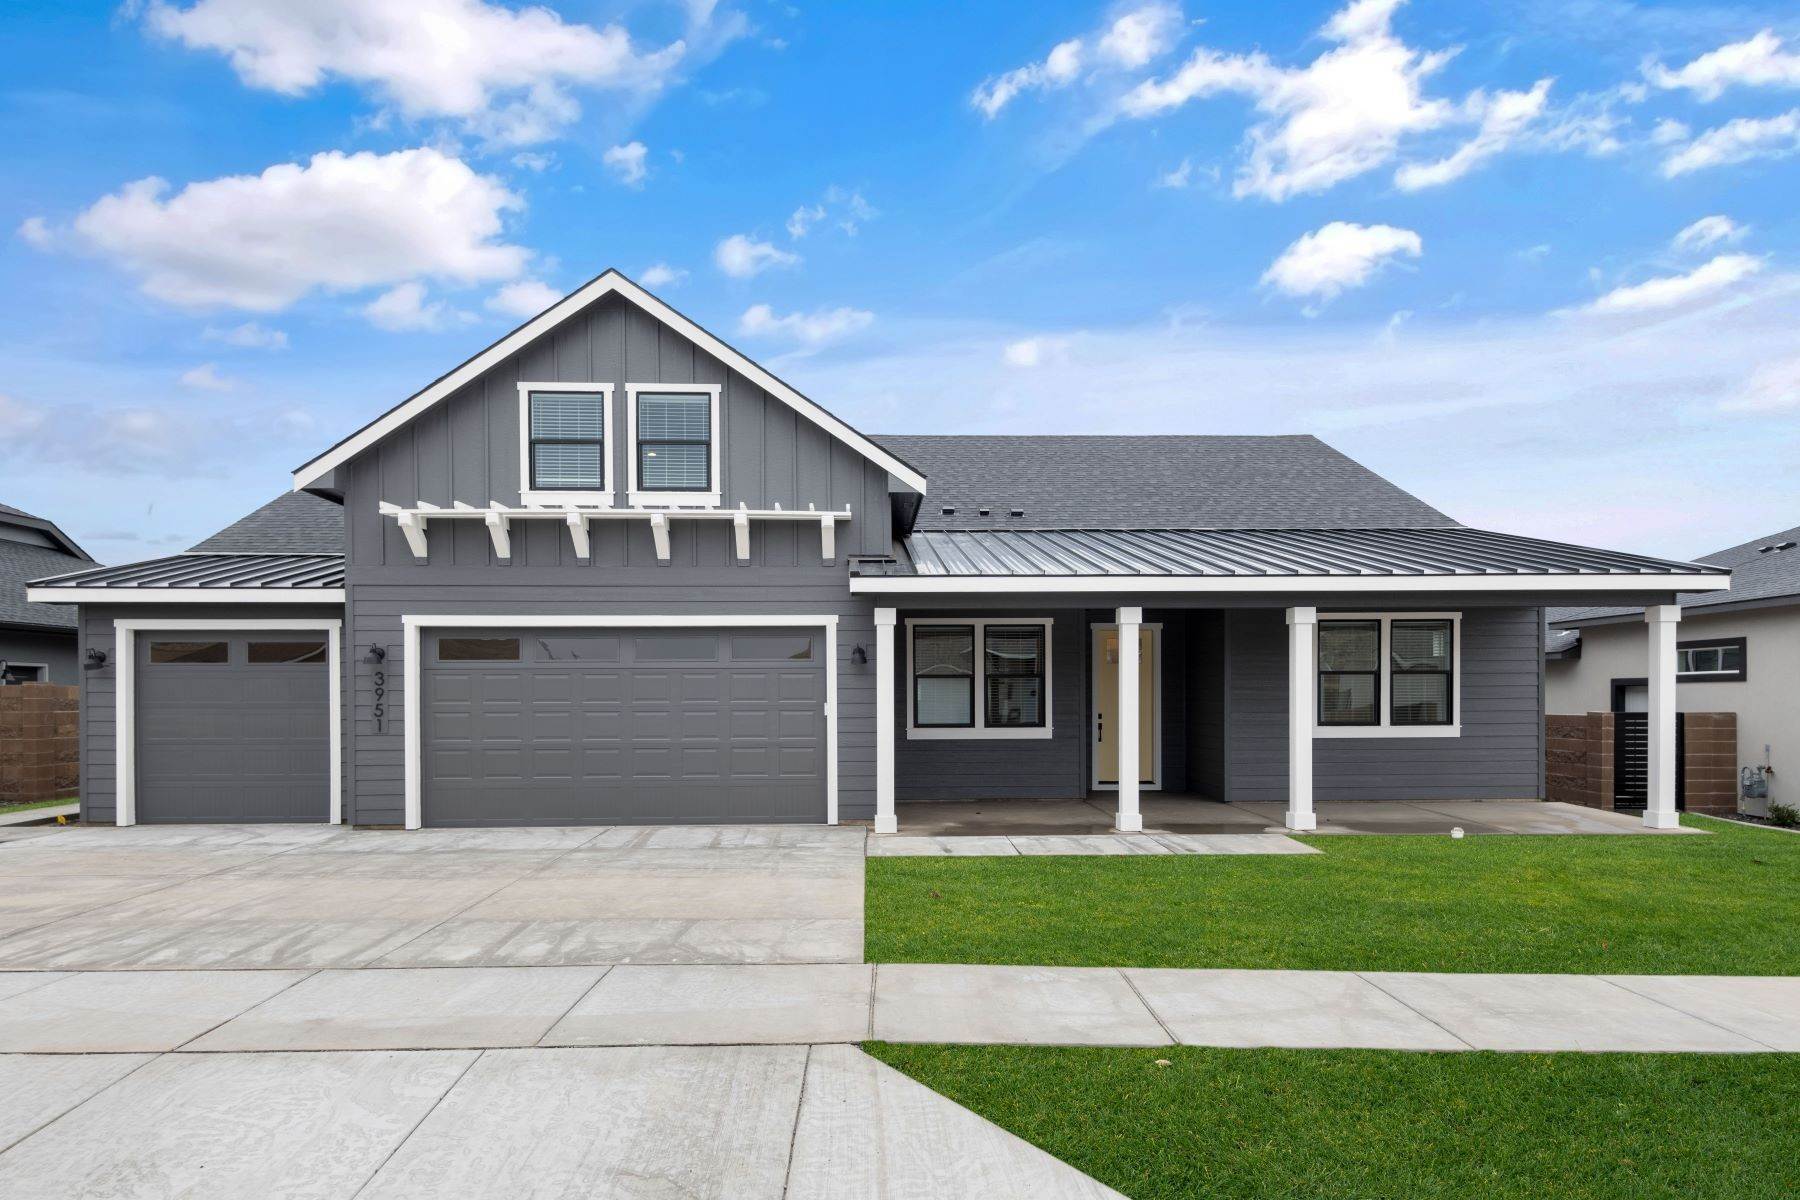 Single Family Homes for Sale at Gorgeous rambler with bonus & huge in law suite! 3951 Corvina Street Richland, Washington 99352 United States